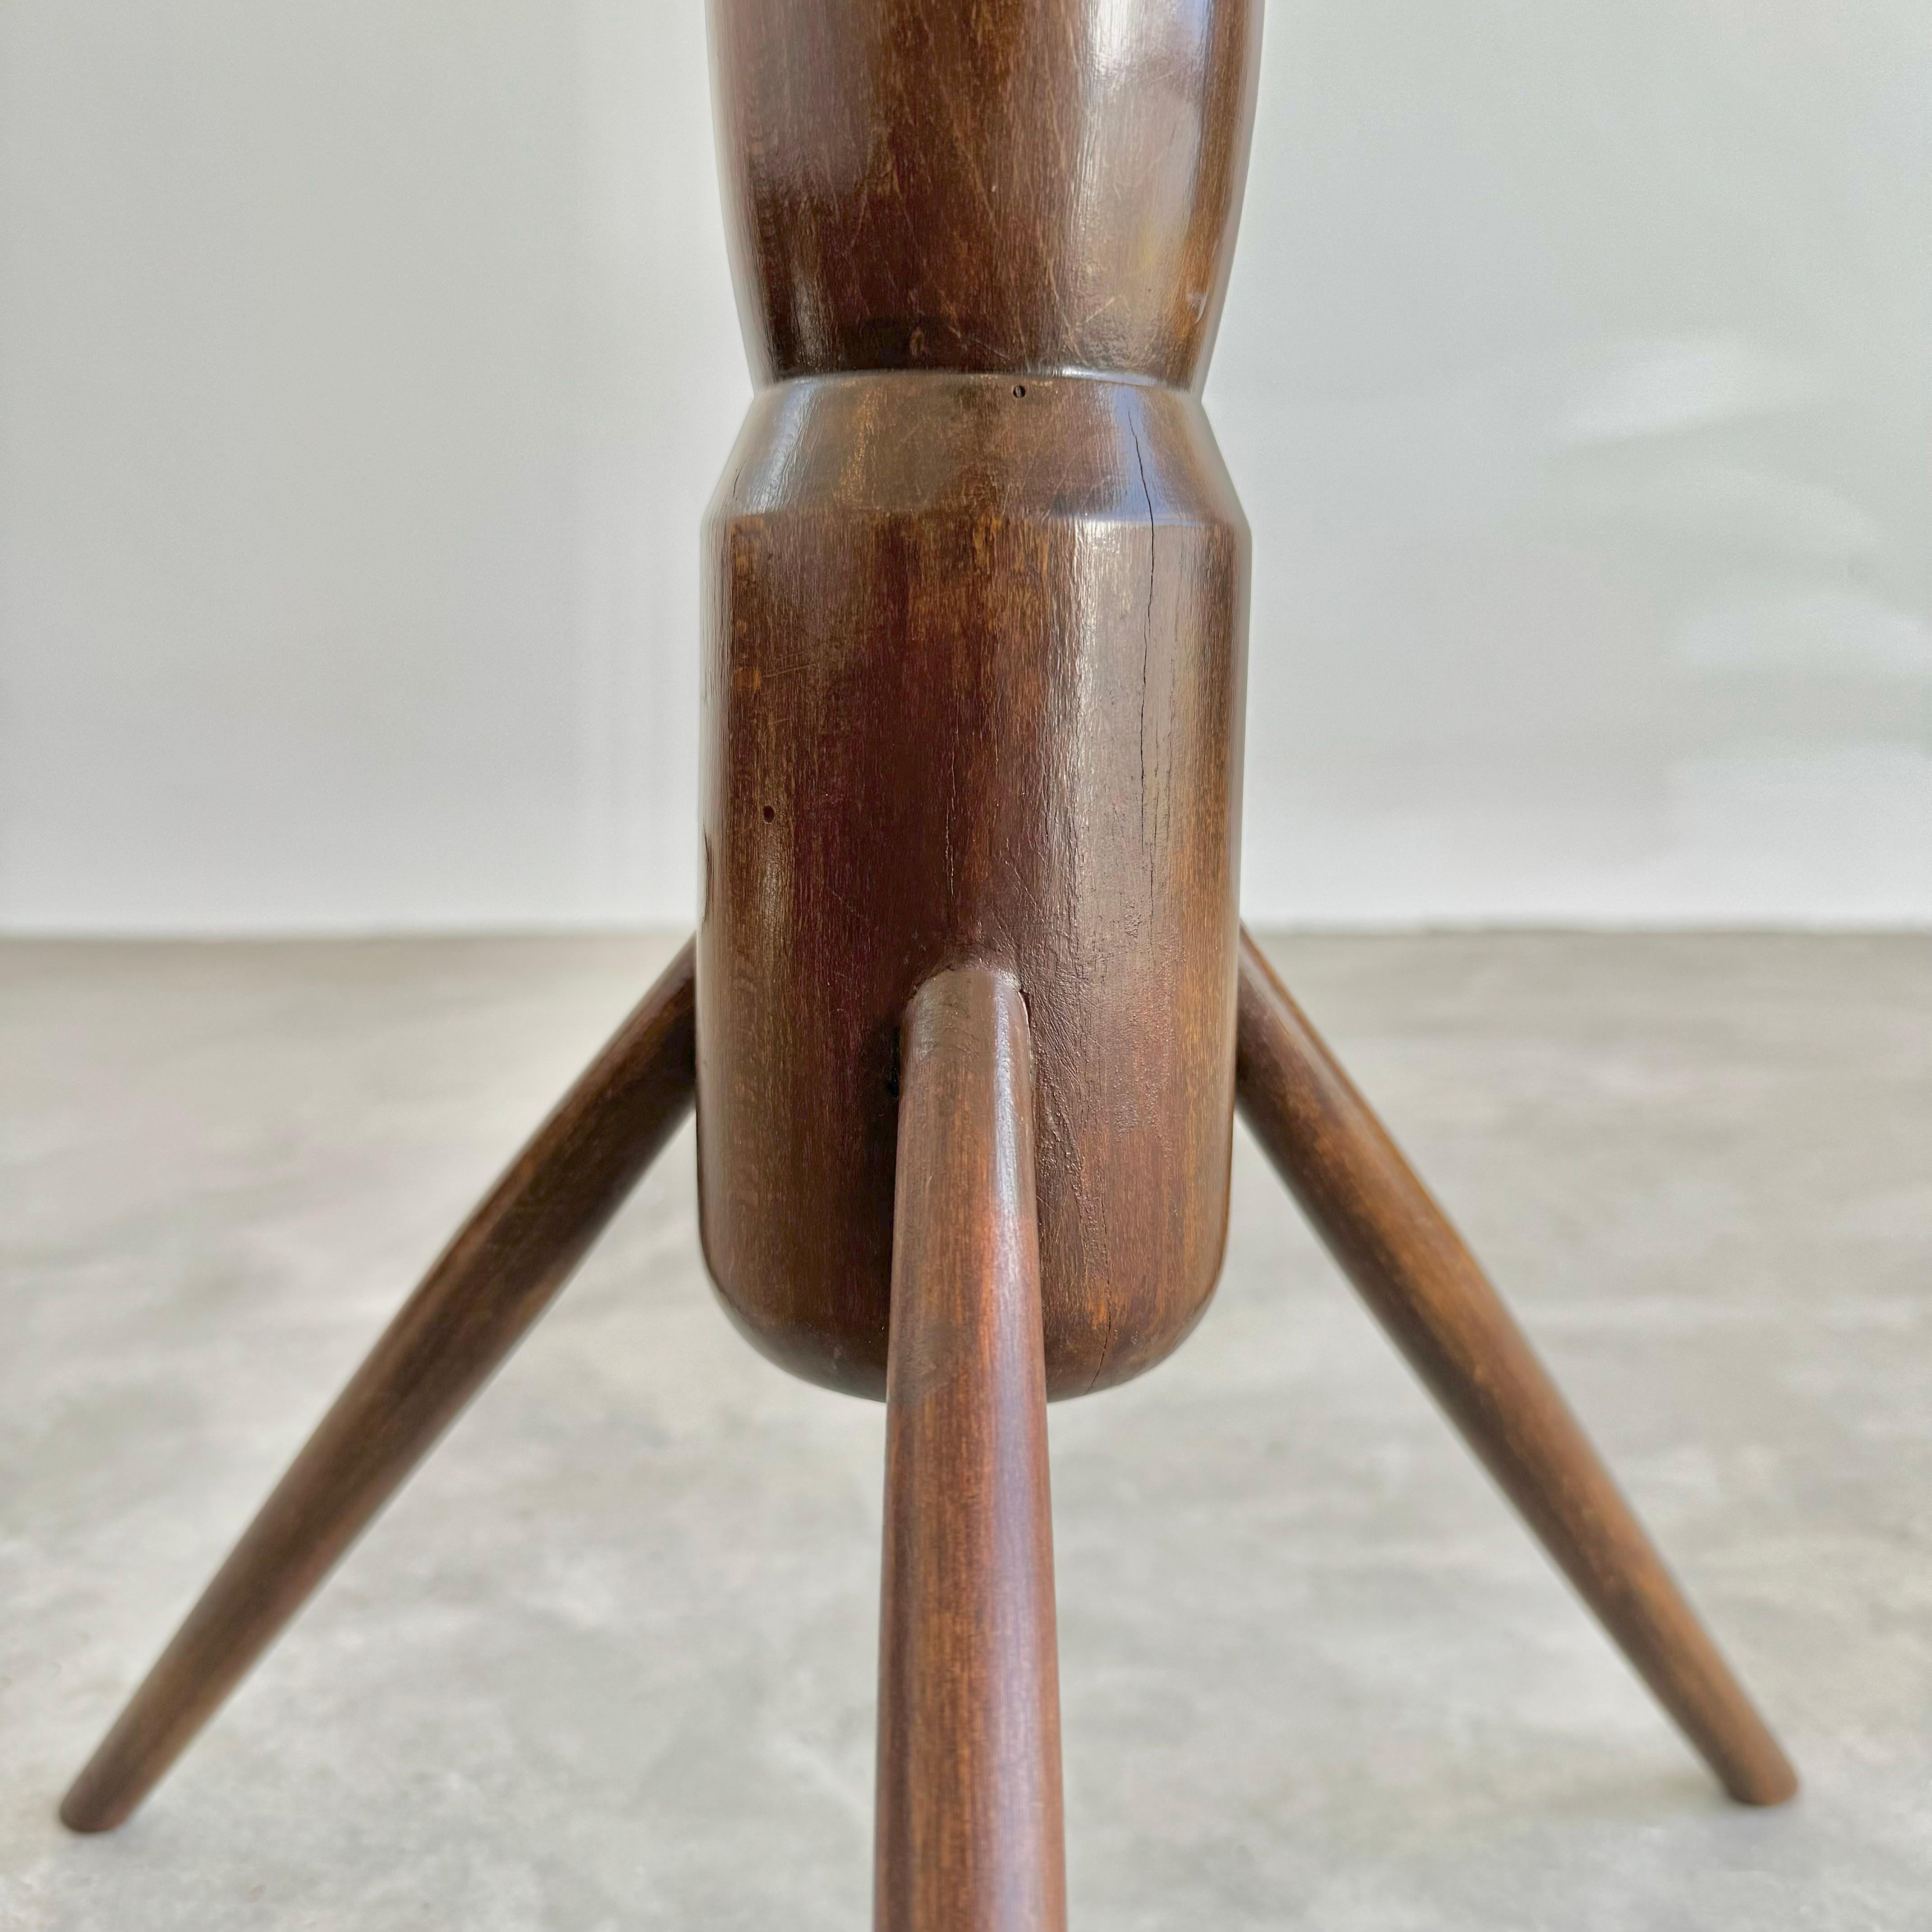 Wood and Glass Tripod Cocktail Table, 1950s Italy For Sale 1